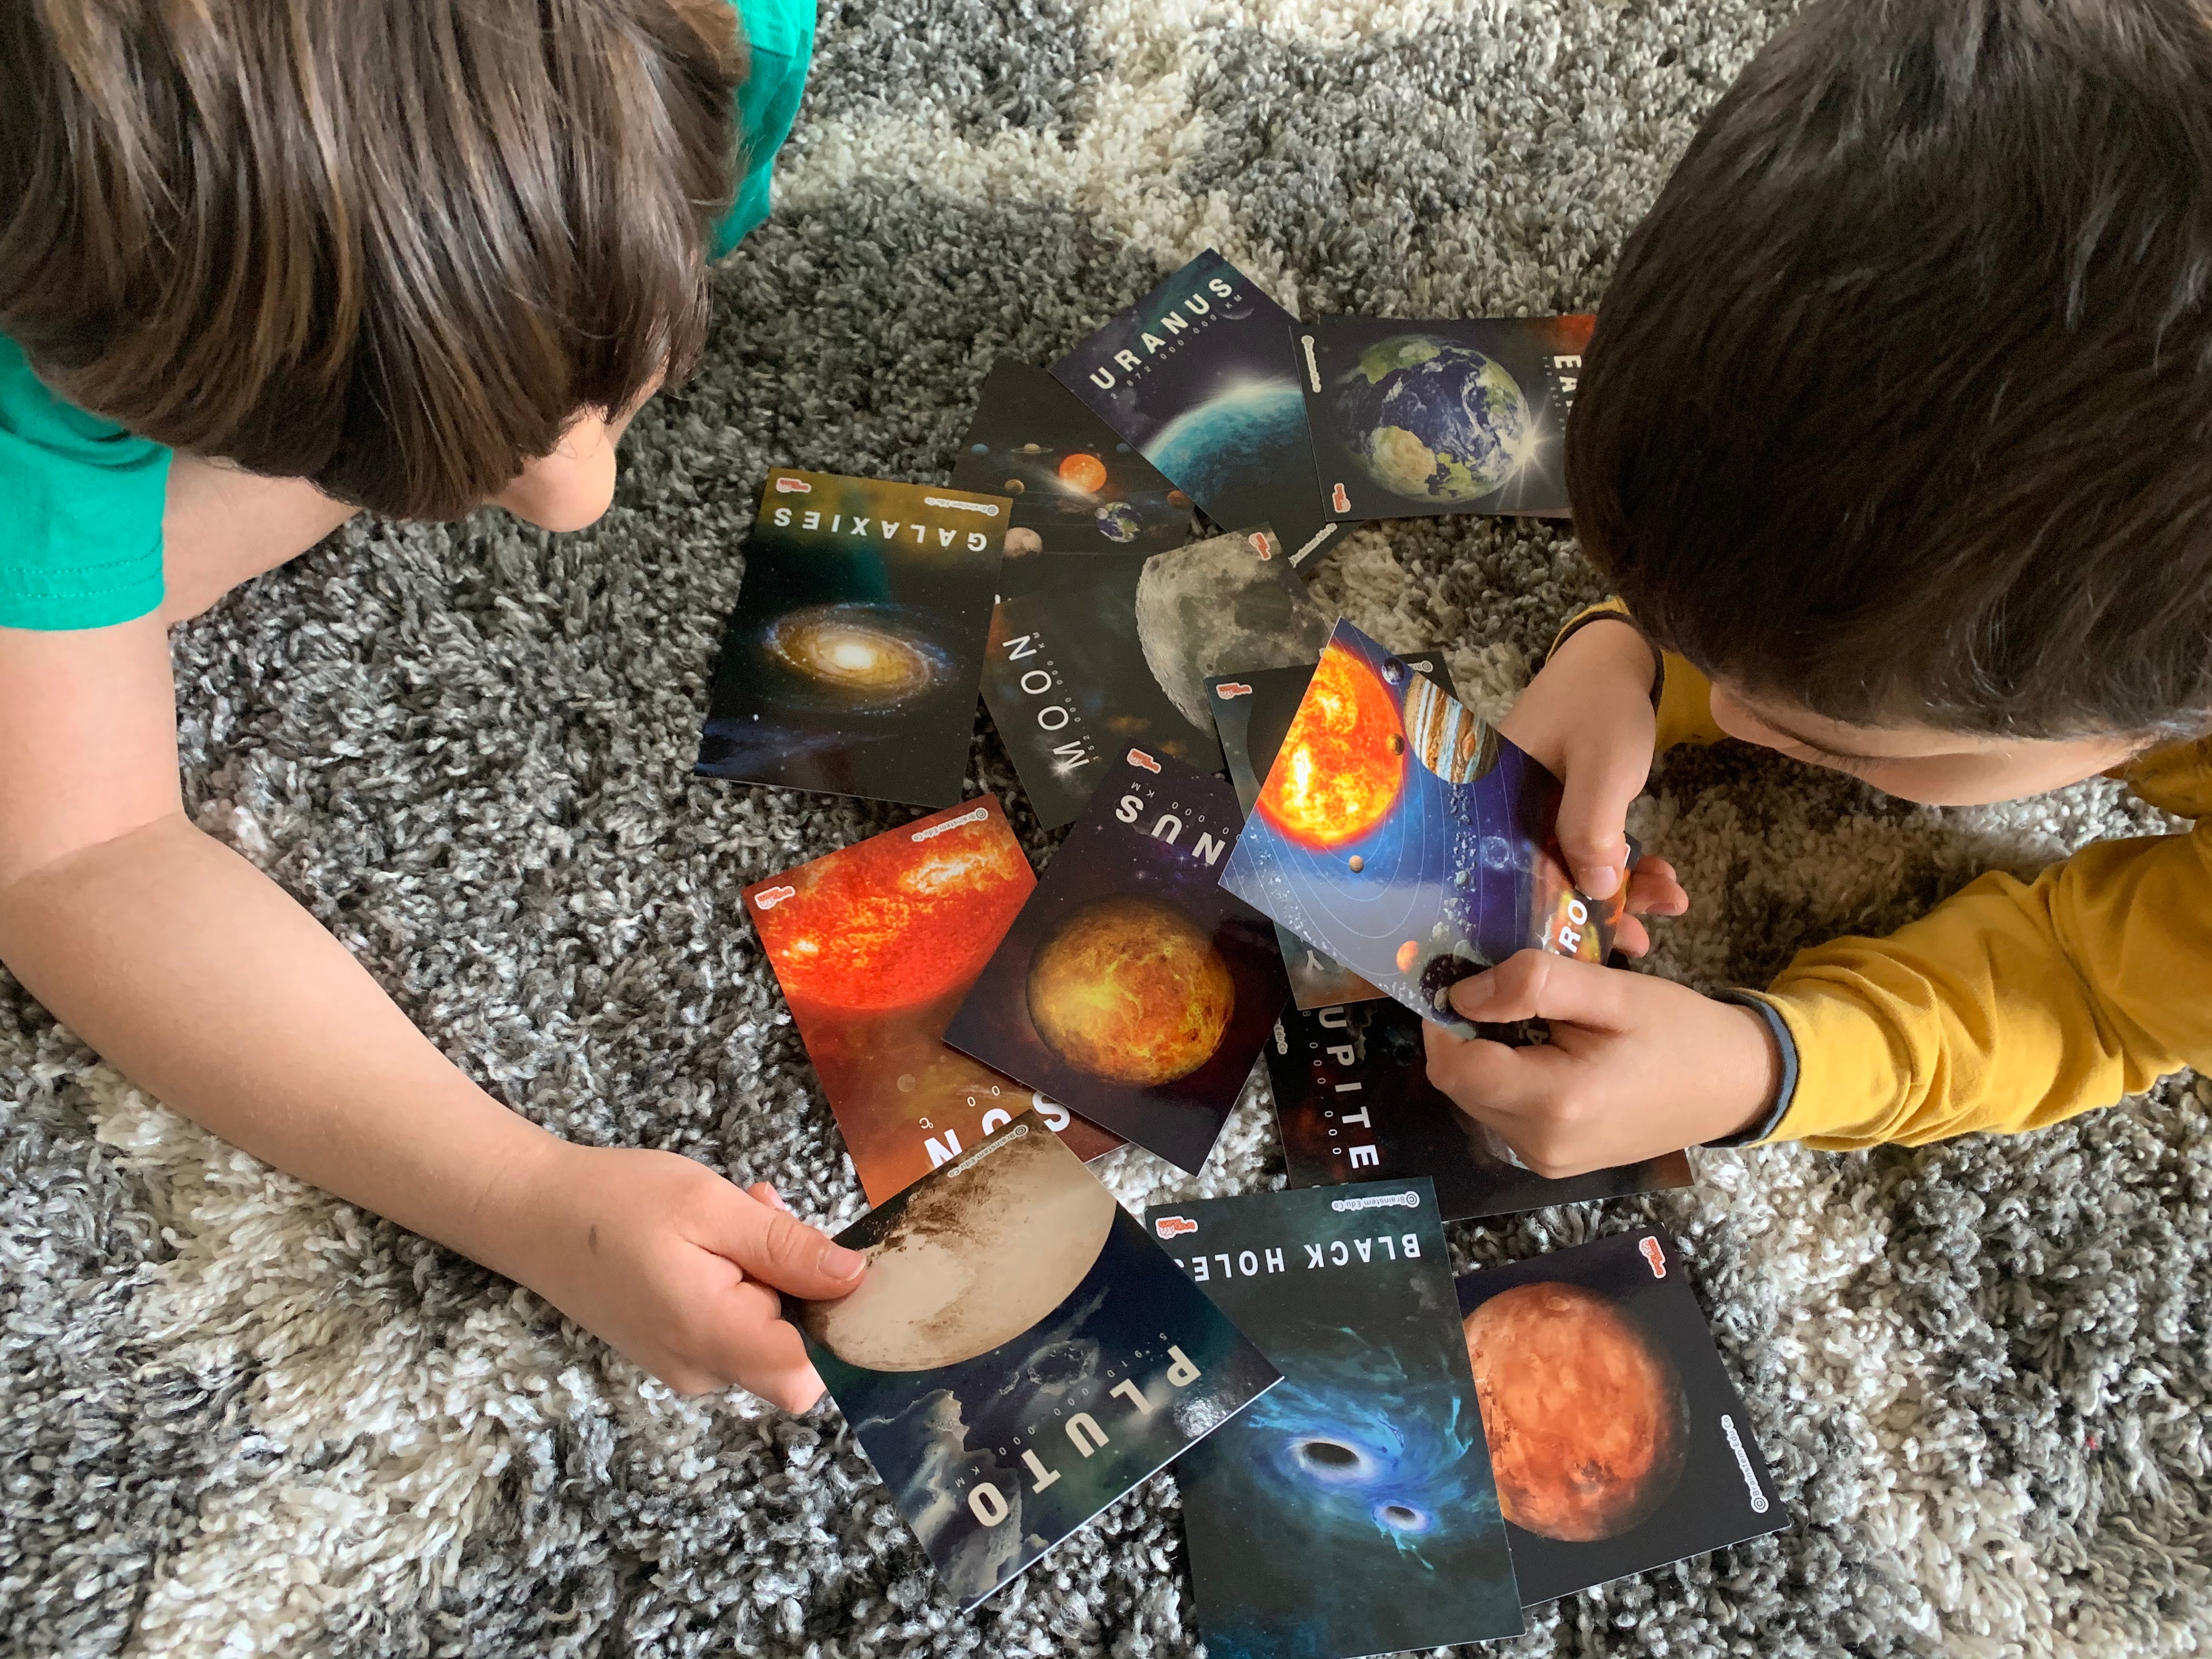 Child using tablet with augmented reality app to explore planets, playing and learning through interactive experience. Ideal for STEM education.